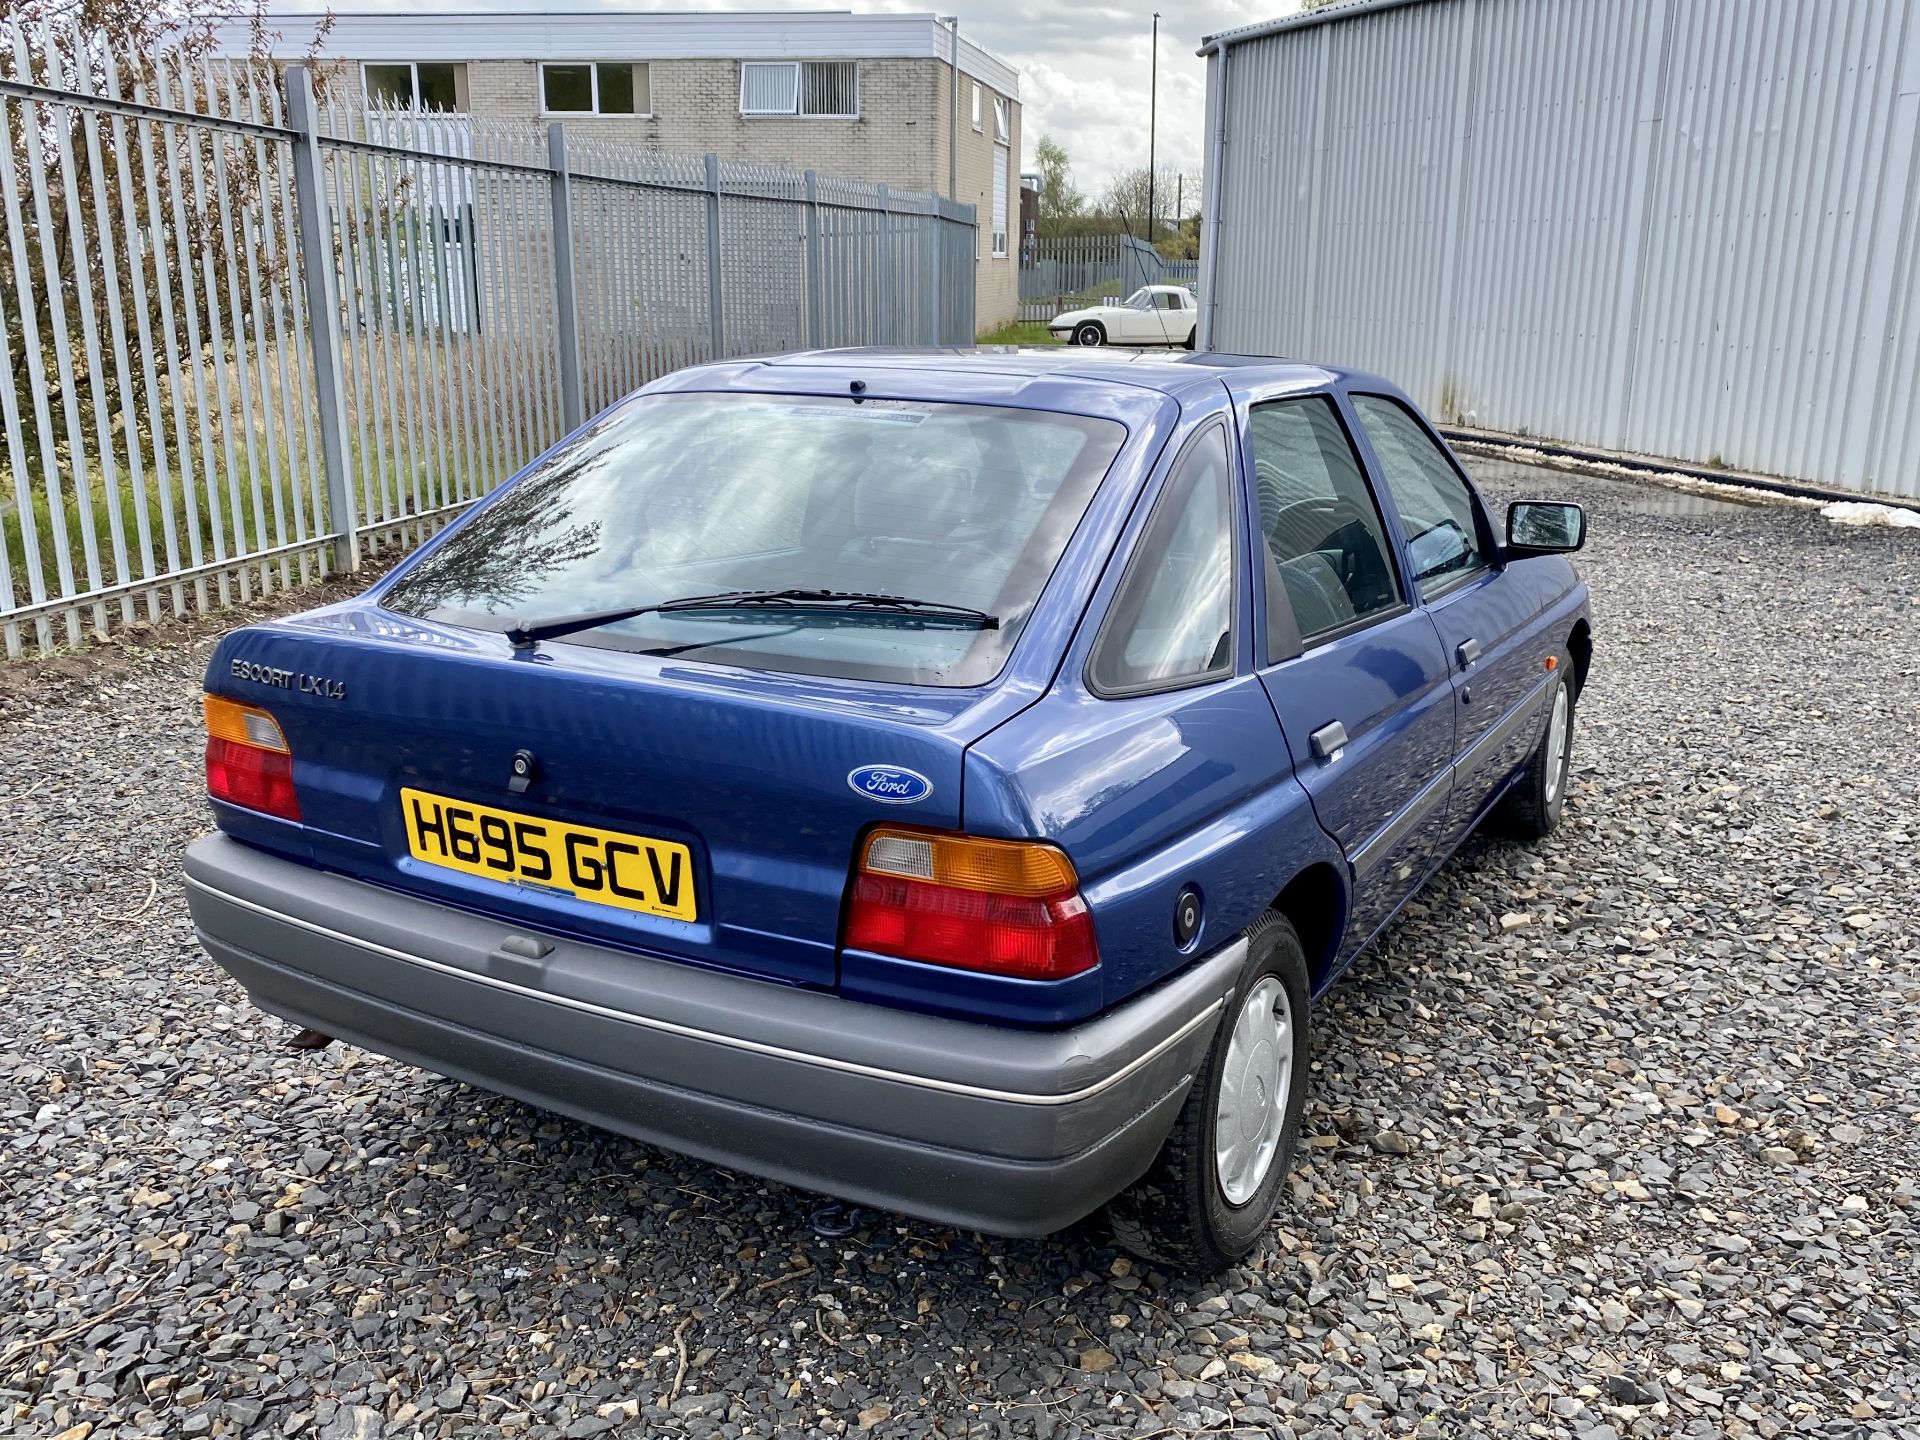 Ford Escort LX1.4 - Image 9 of 54